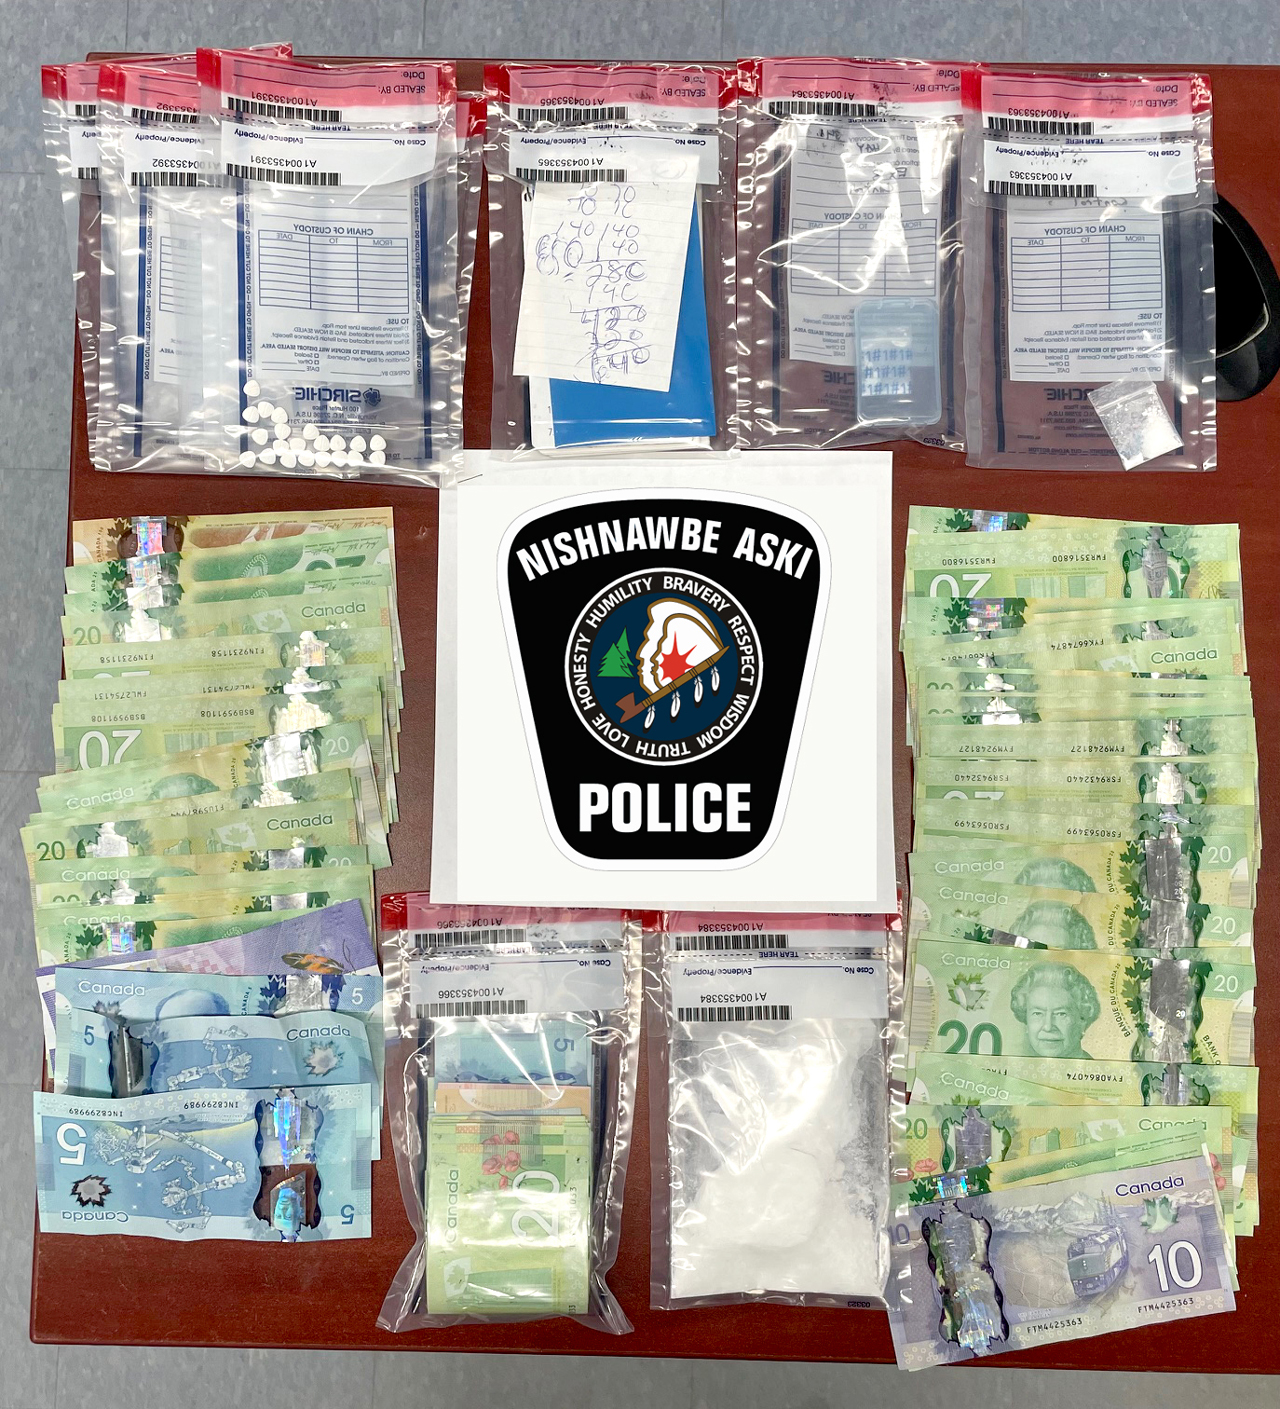 Police arrested two suspects and seized a quantity of cocaine and Hydromorphone pills following a search of two Sandy Lake First Nation homes